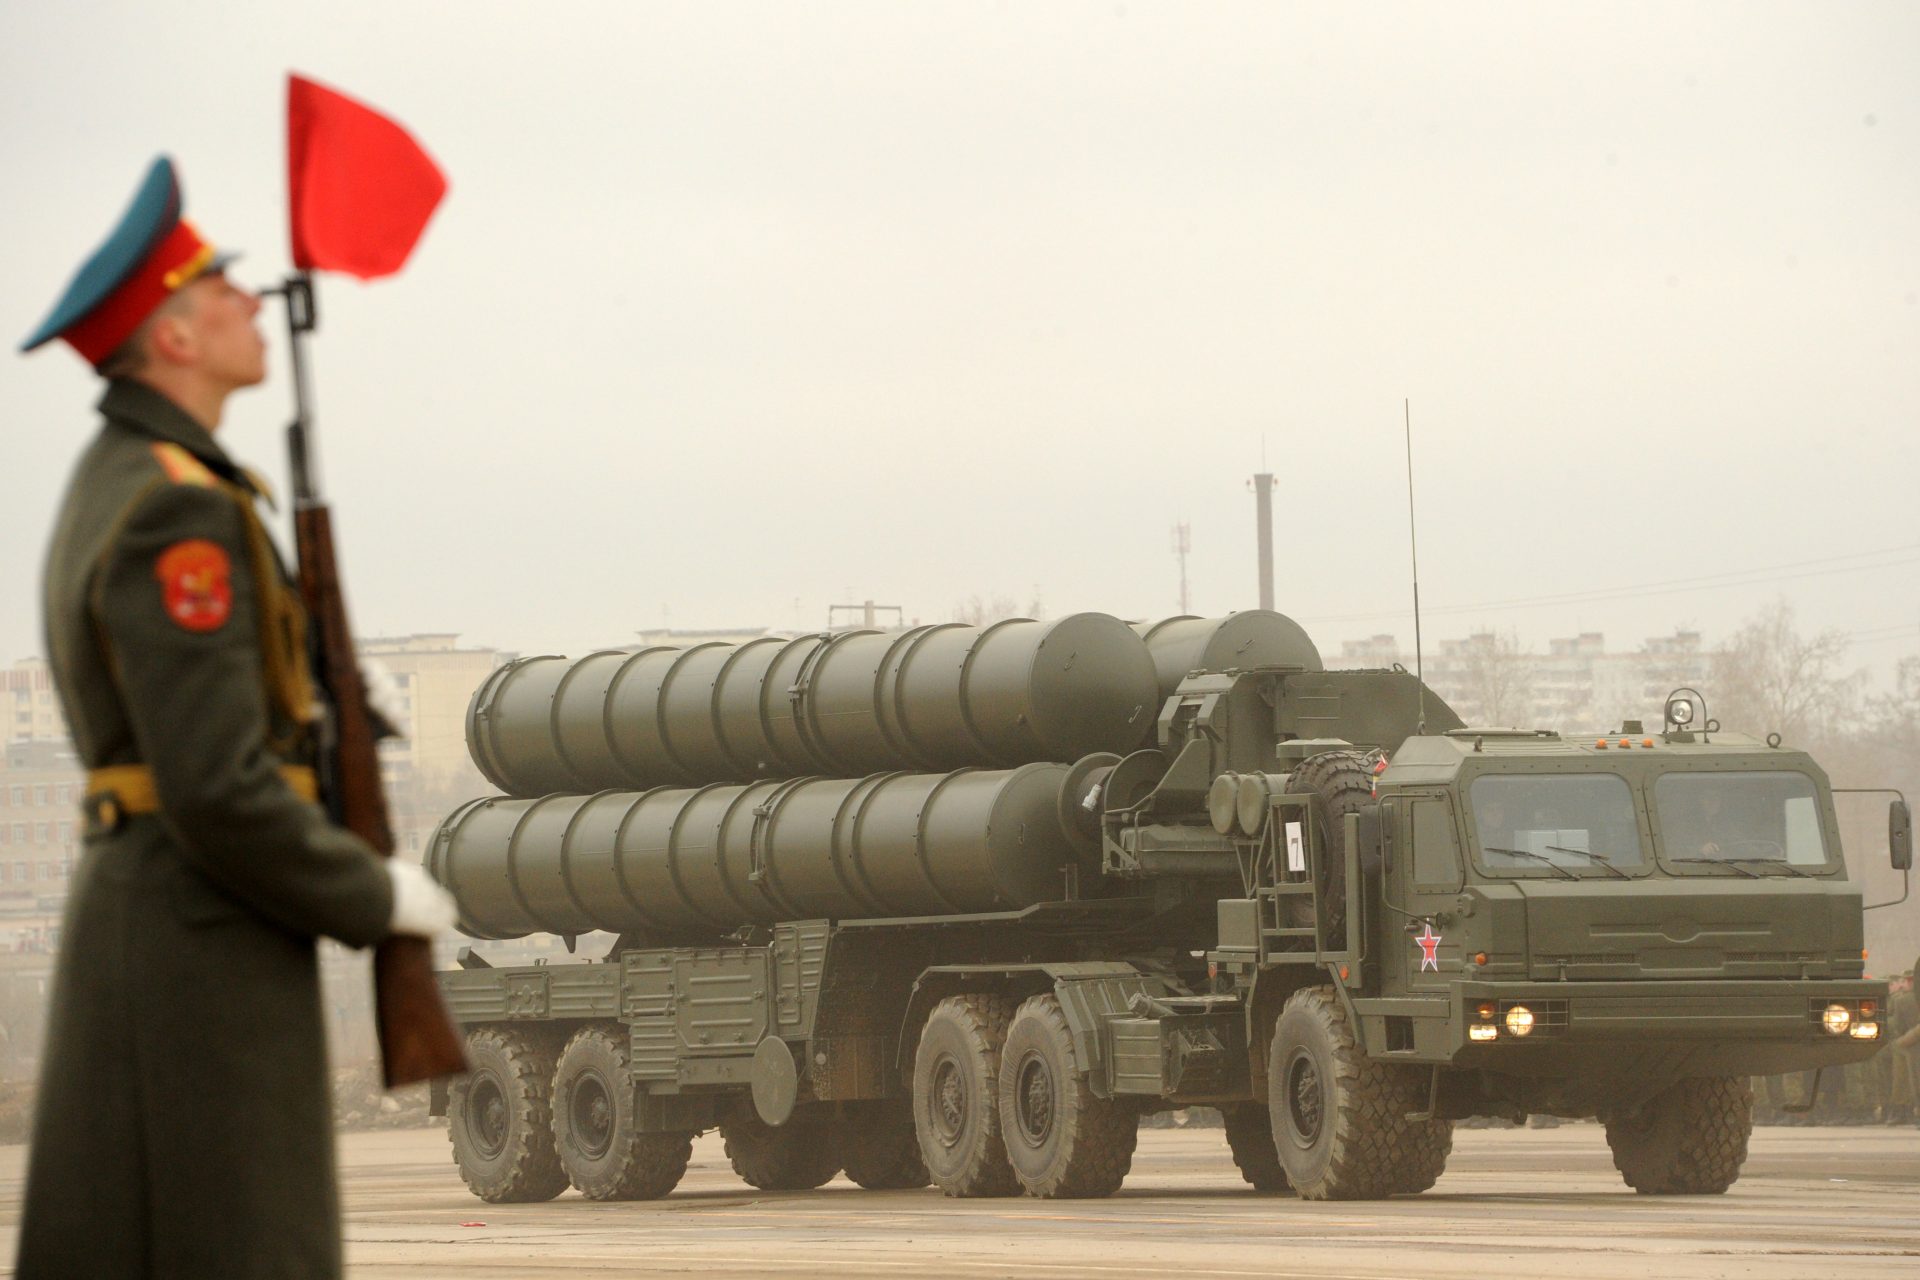 Russia’s use of the S-300